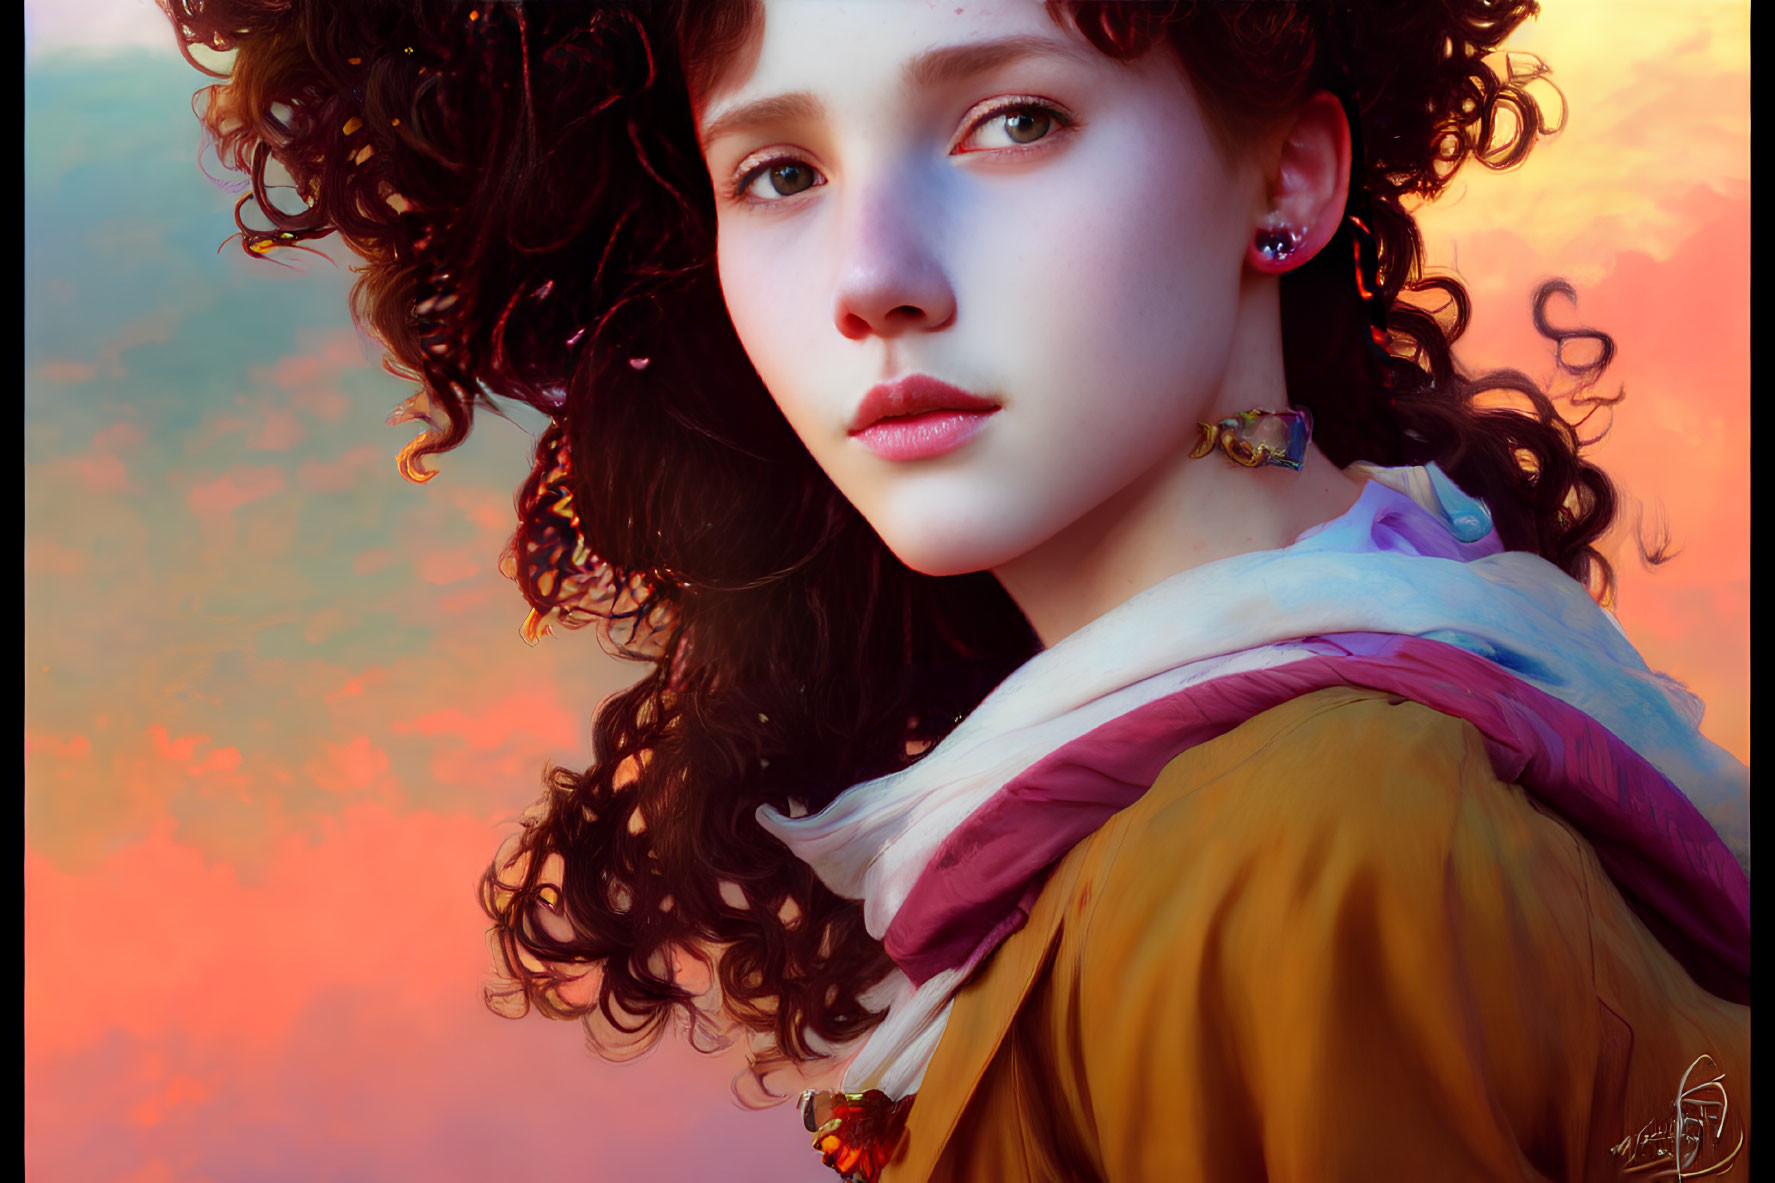 Vibrant digital portrait of young woman with curly hair against colorful sky